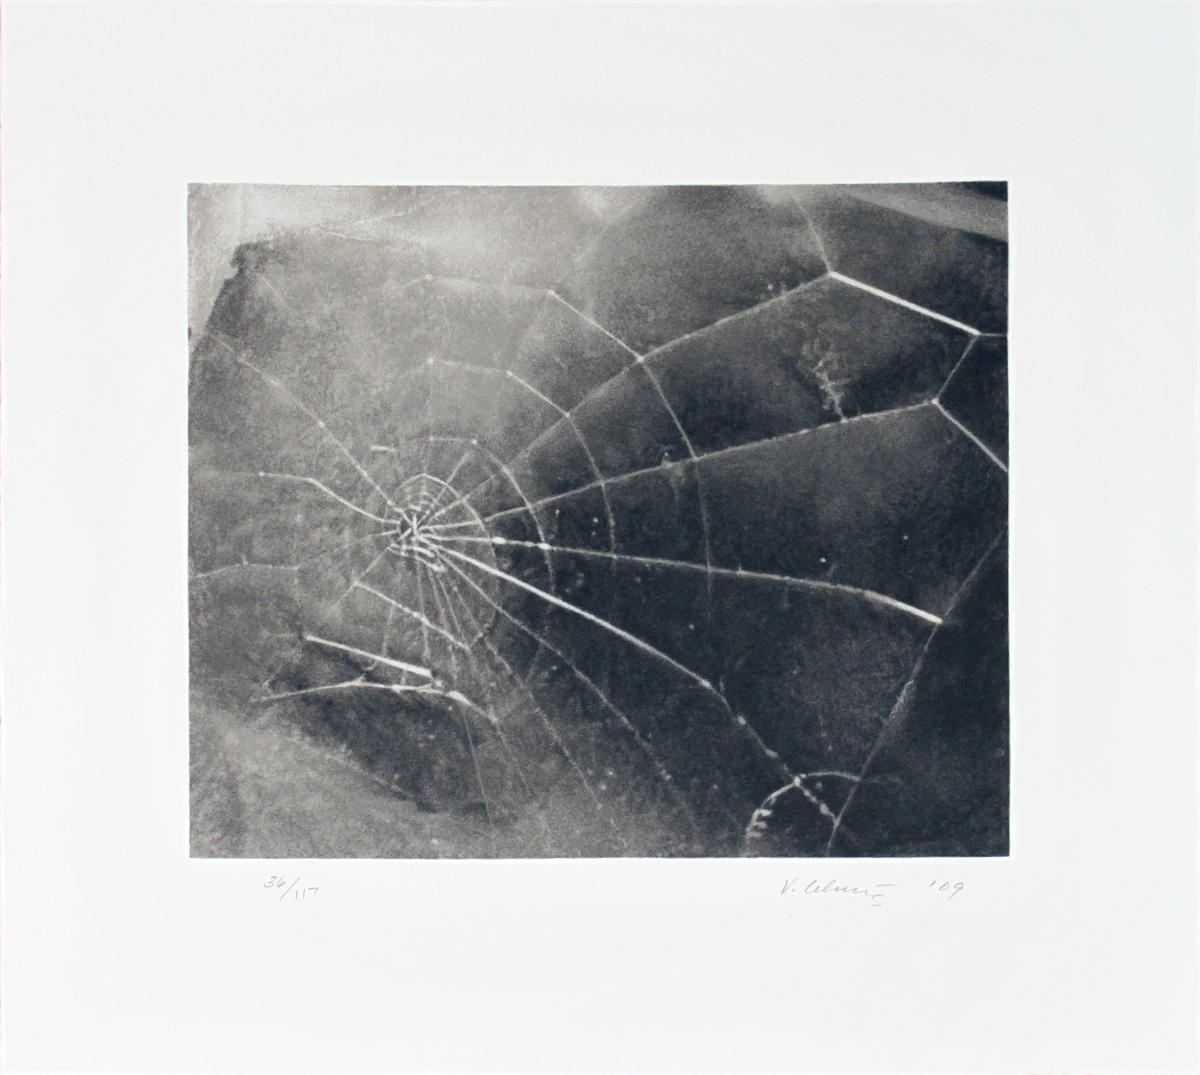 Sku: LC1196-B
Artist: Vija Celmins
Title: Spider Web
Year: 2009
Signed: Yes
Medium: Serigraph
Paper Size: 17.5 x 19 inches ( 44.45 x 48.26 cm )
Image Size: 11 x 13 inches ( 27.94 x 33.02 cm )
Edition Size: 117
Framed: No
Condition: A: